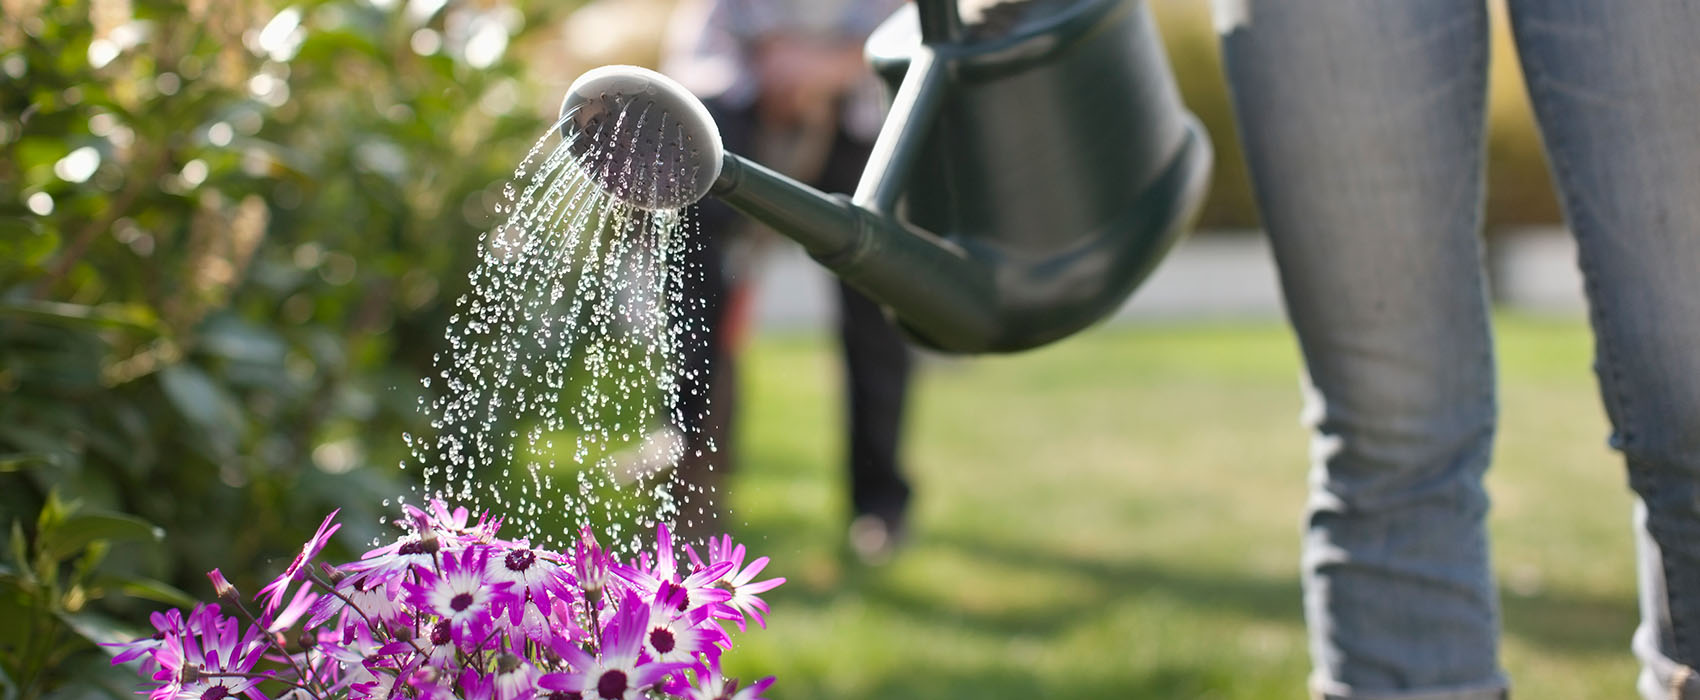 Person using watering can to water pot of purple daisies outside